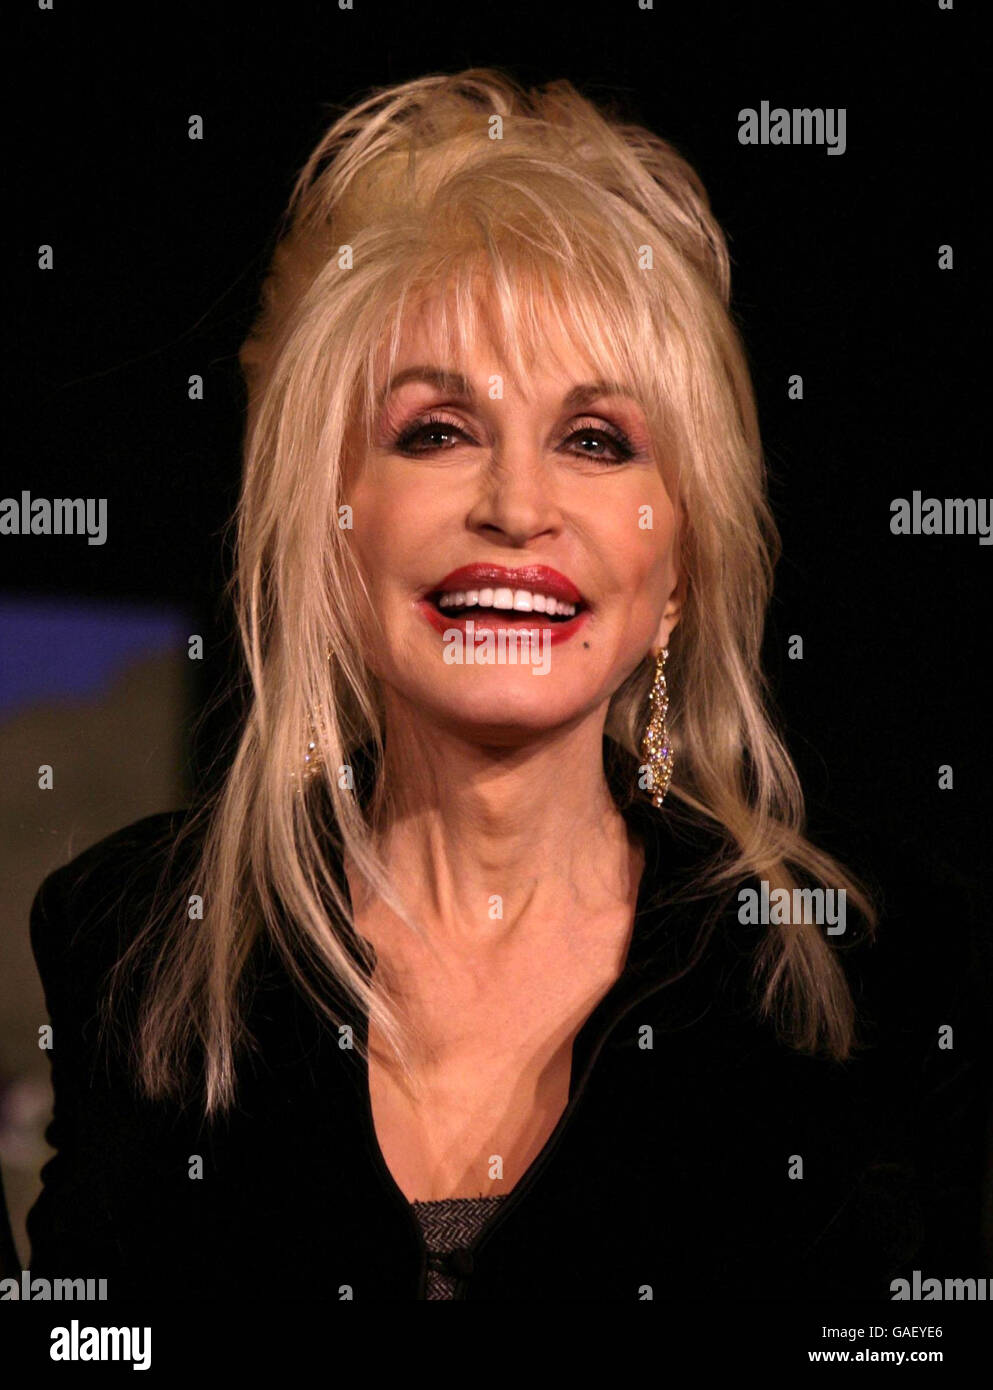 Dolly Parton performs at the launch of her Imagination Library of the United Kingdom - an educational initiative of her Dollywood Foundation that aims for every pre-school child to have their own library of books - at the Savoy Hotel in central London. Stock Photo